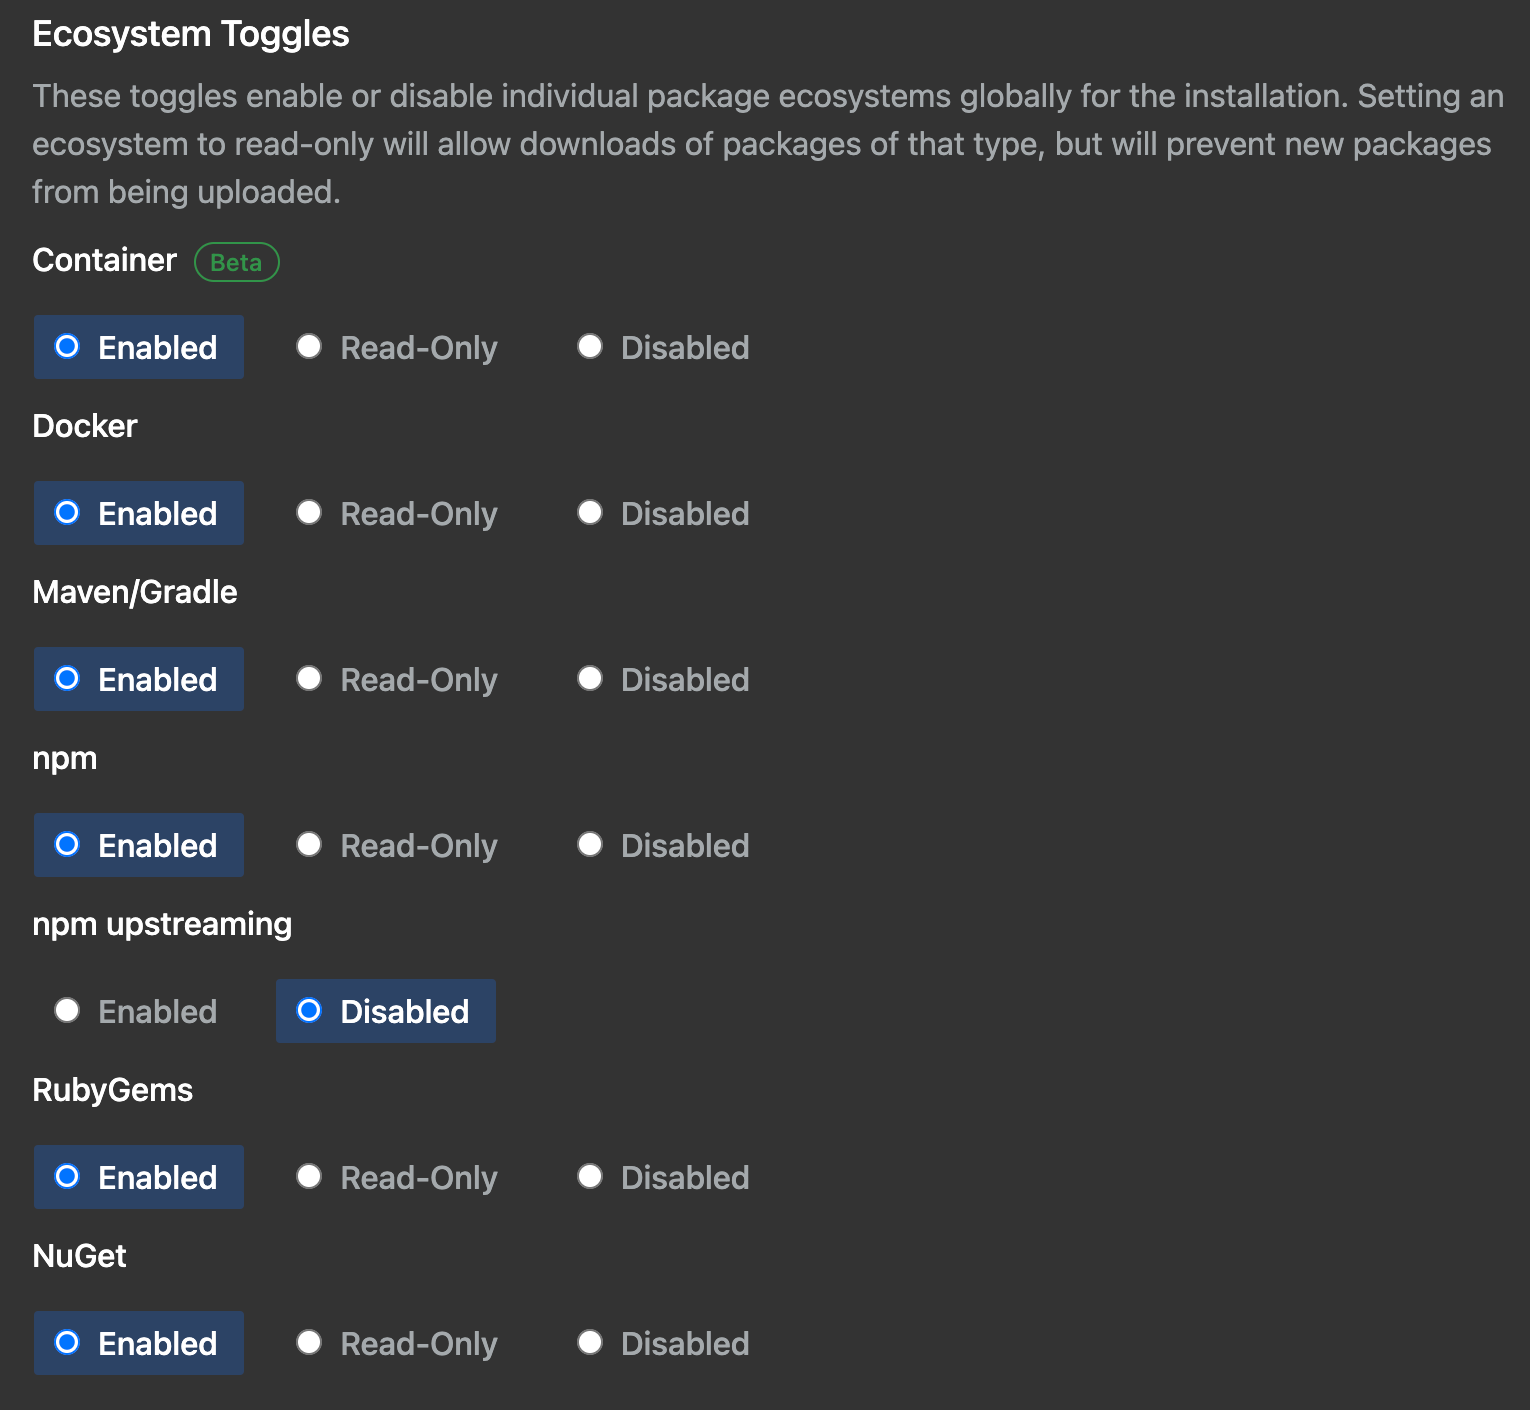 Screenshot of the "Ecosystem toggles" section on the Settings page of the Management Console.